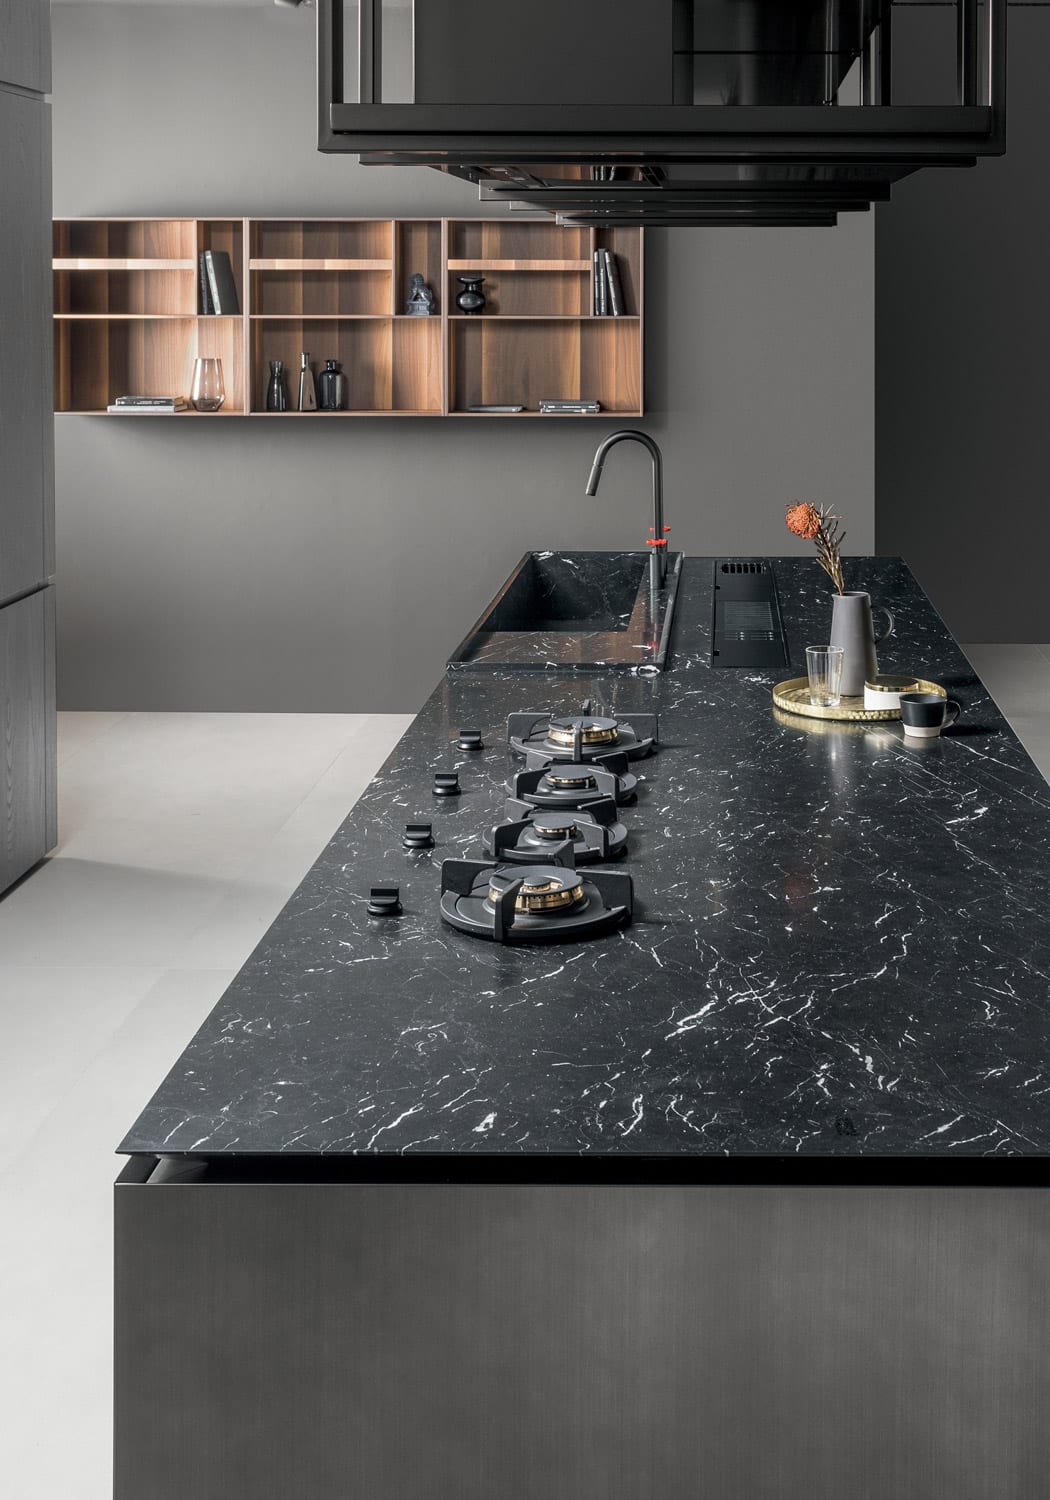 On the island, an elegant solution with countertop and sink block in the same Black Marquinia marble finish. 